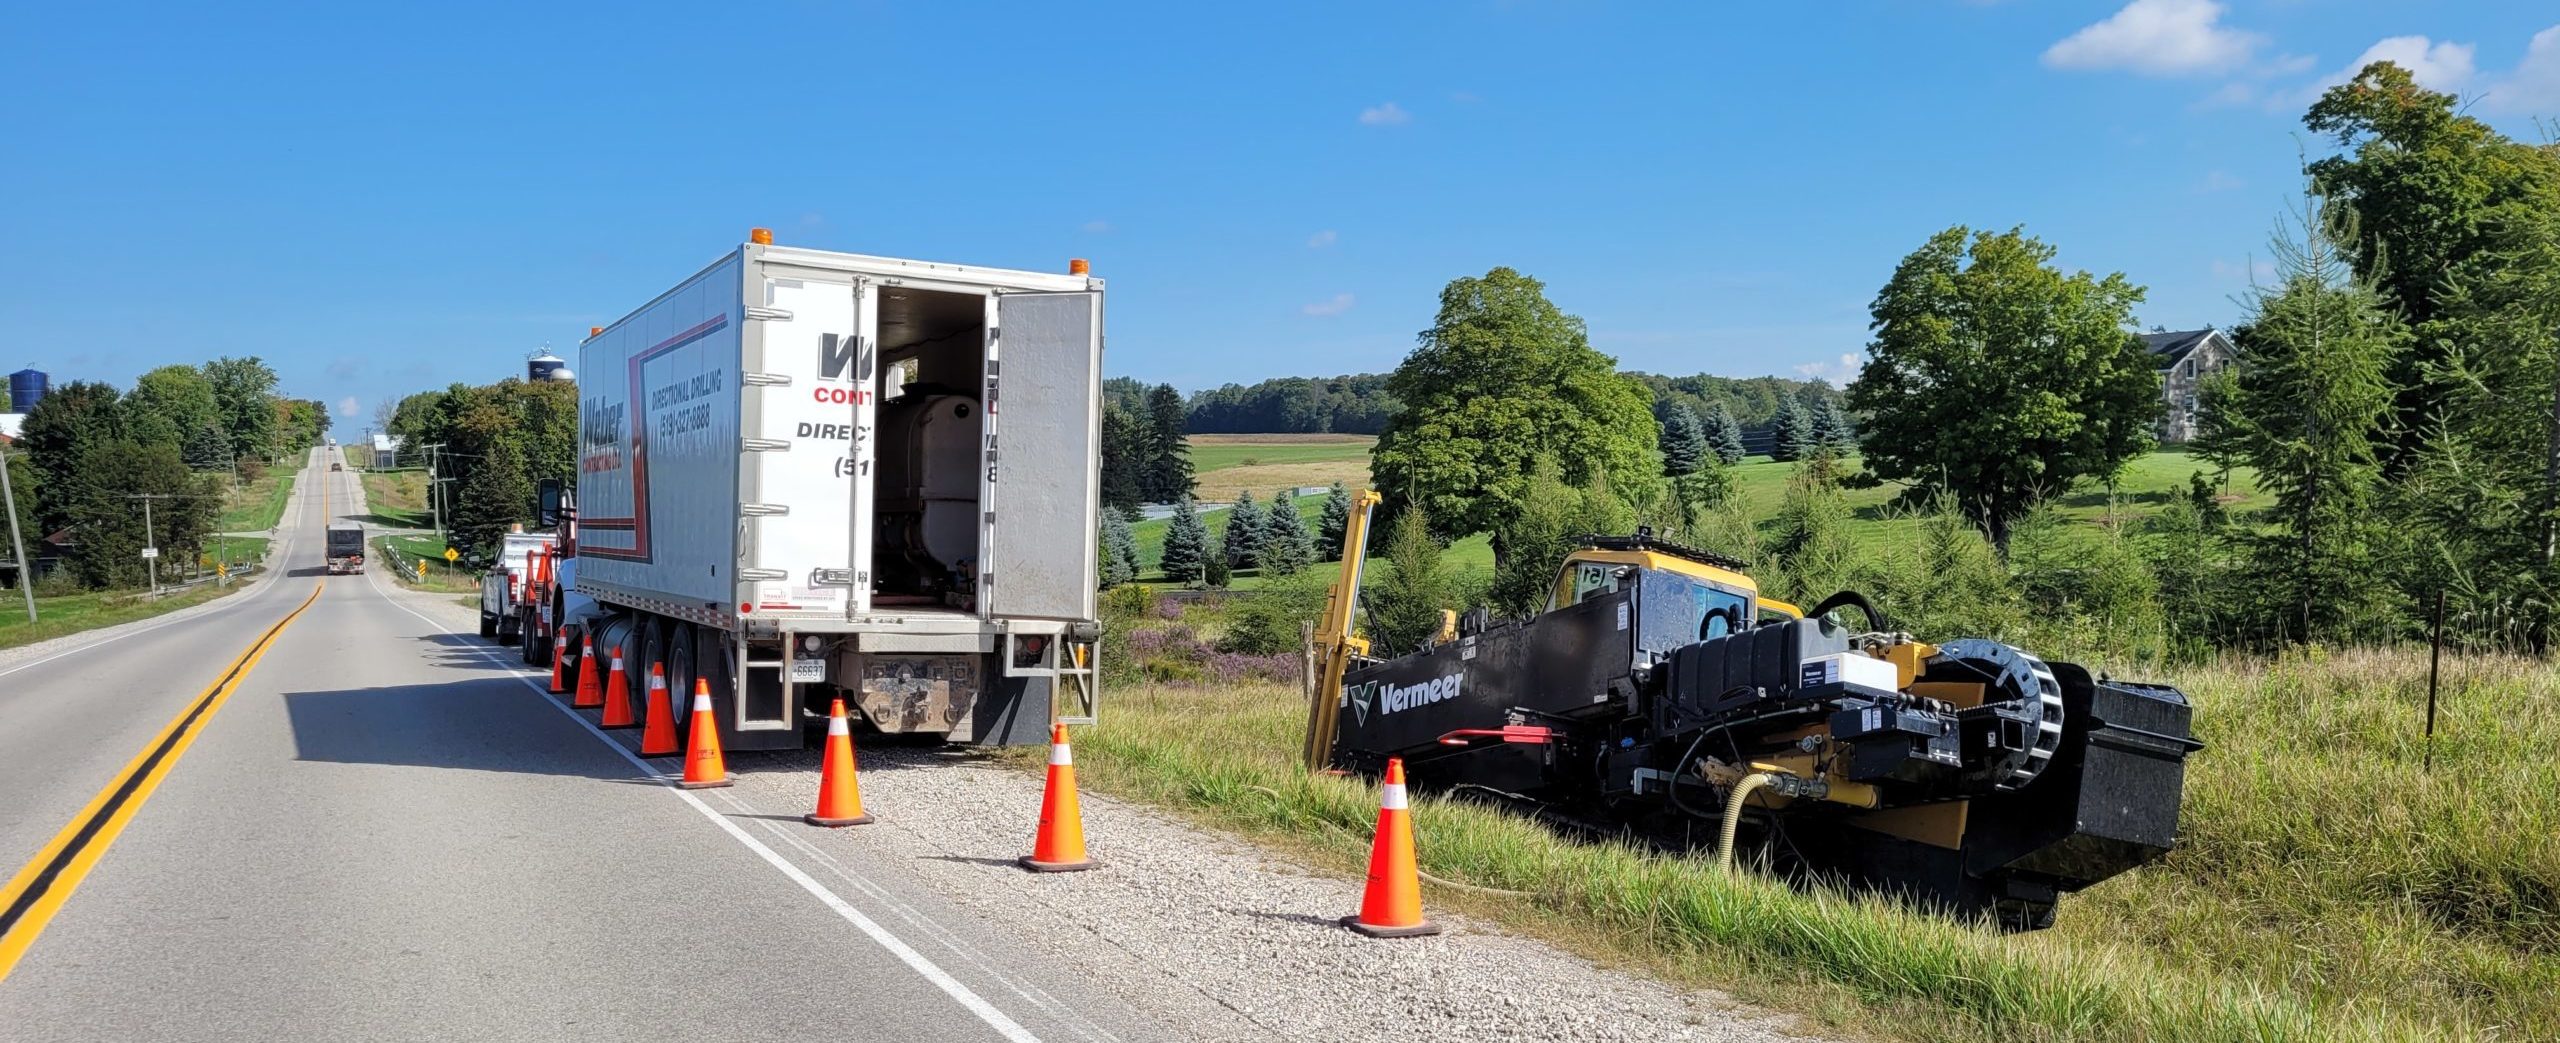 SWIFT Broadband Projects Brings Greater High-Speed Fibre-Optic Connectivity to Perth County